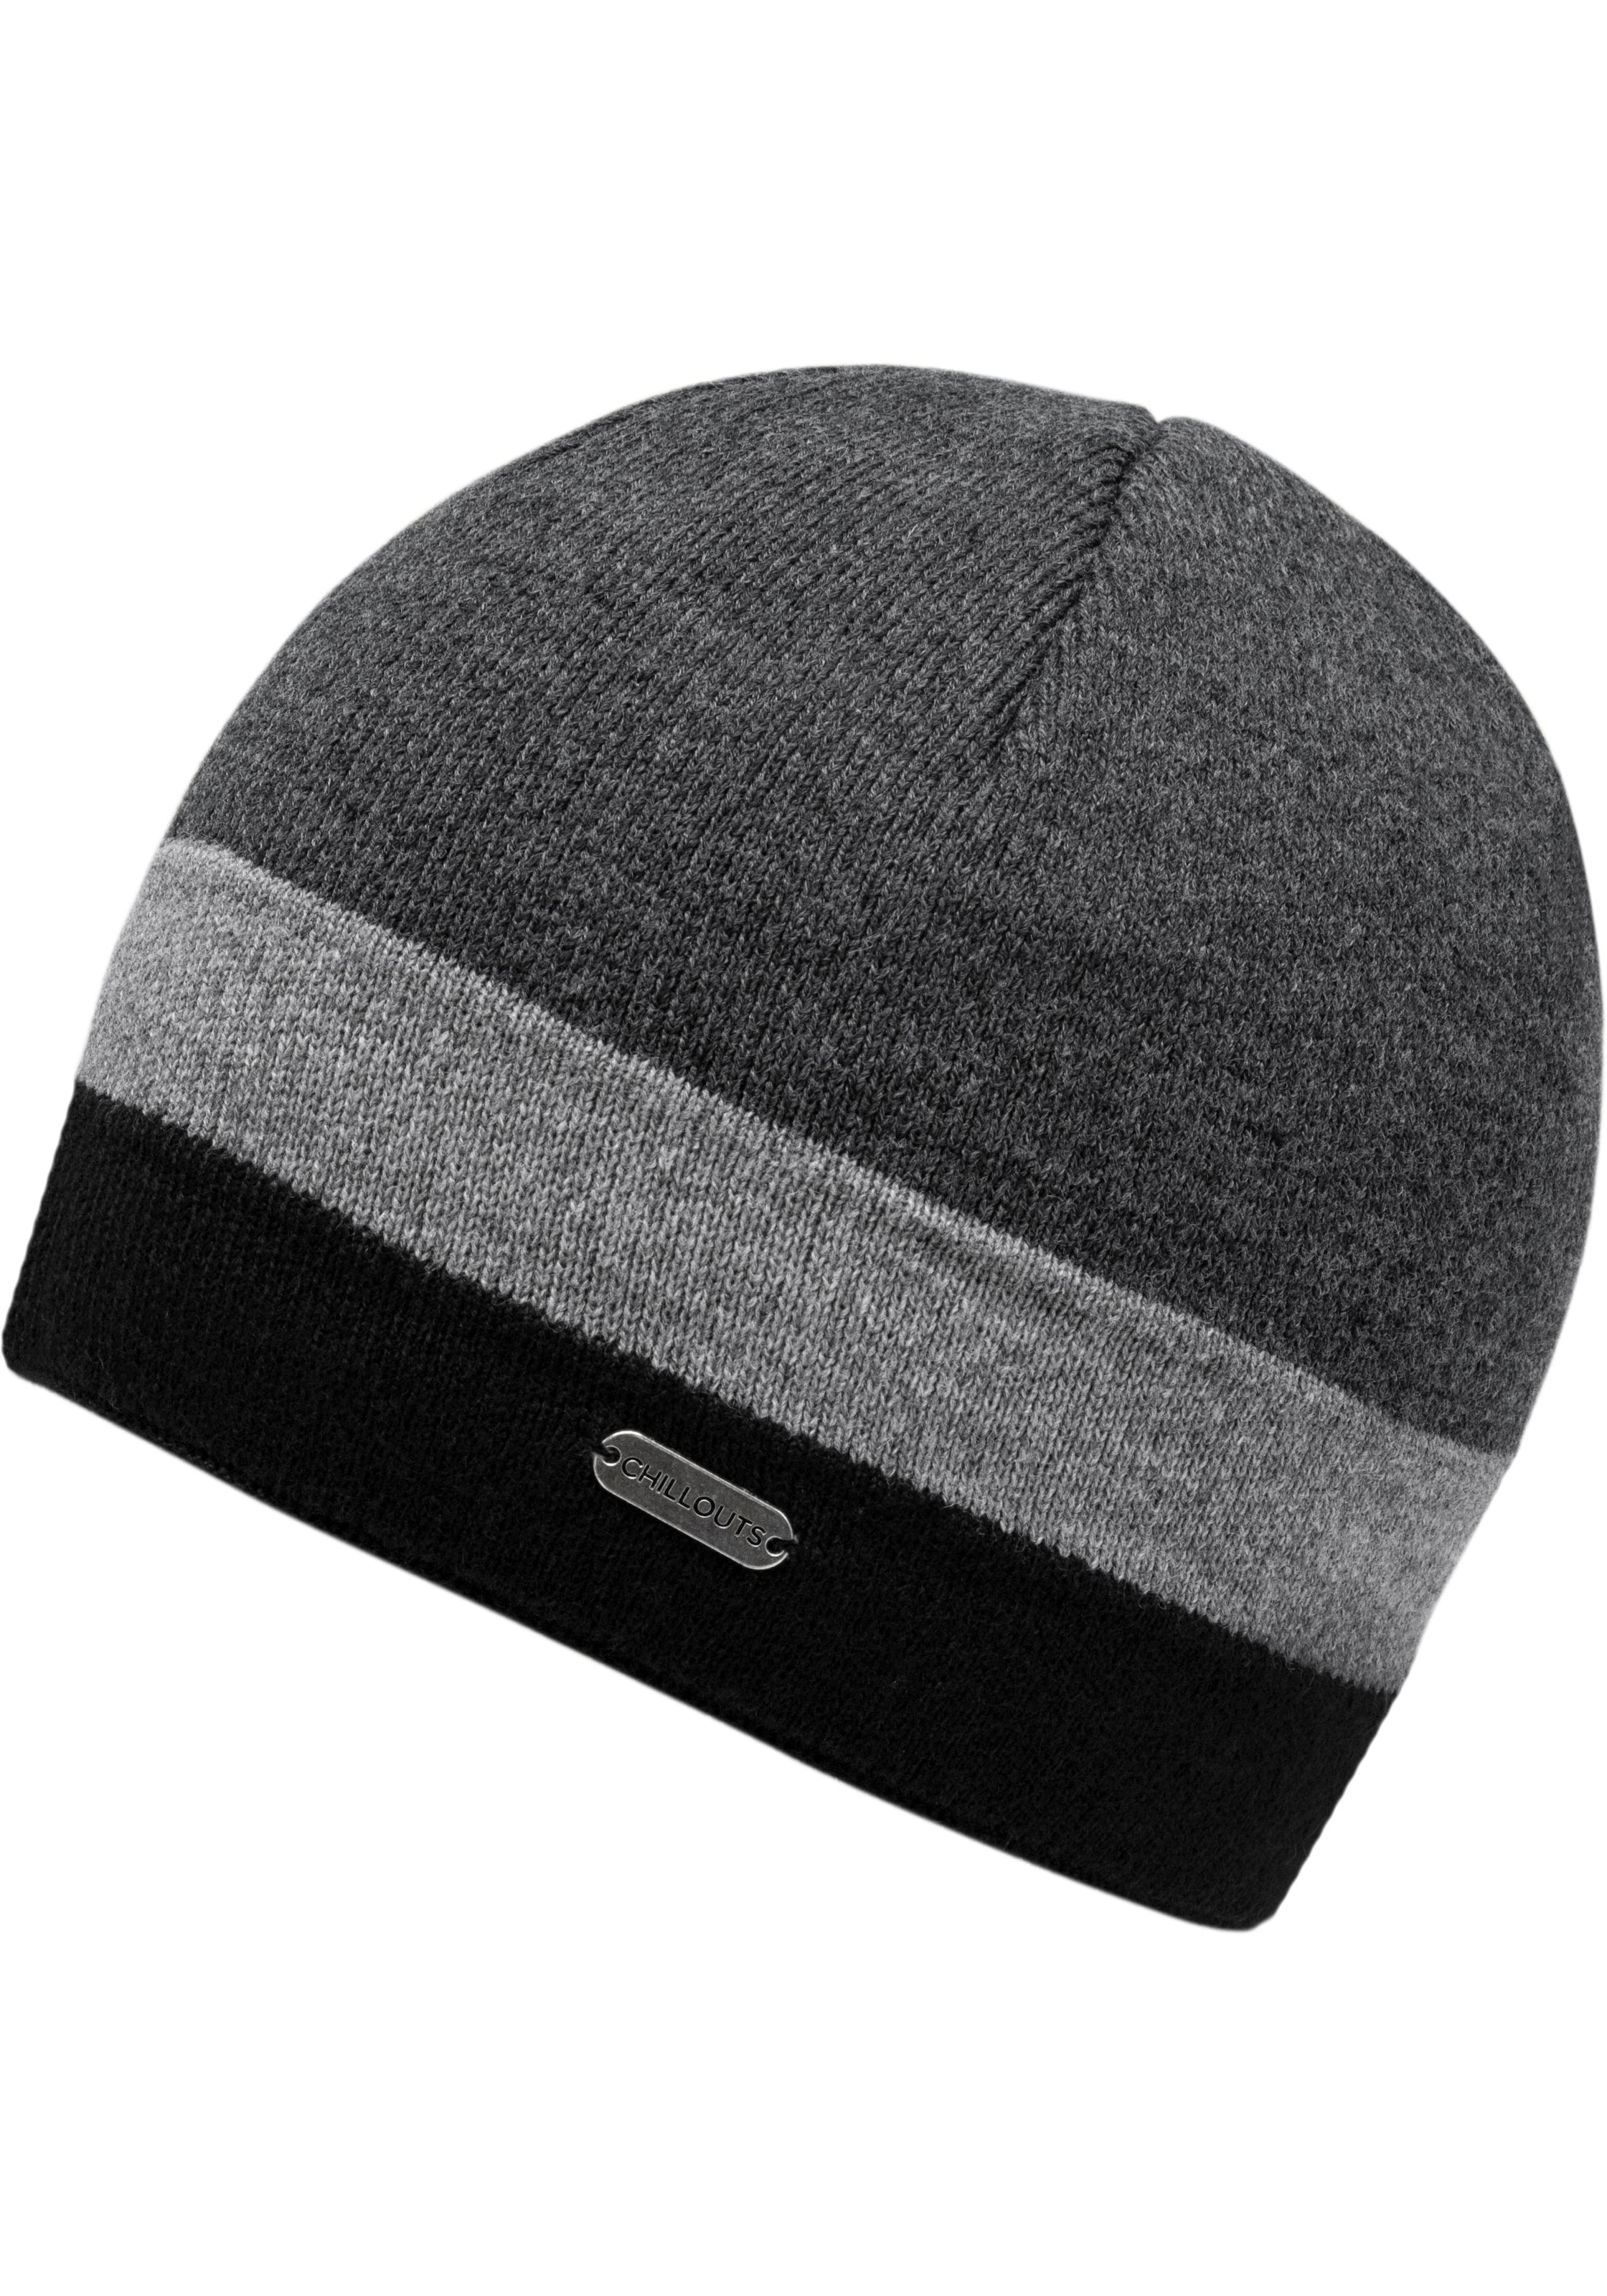 | Hat«, Beanie »Johnny Hat kaufen online UNIVERSAL Johnny chillouts